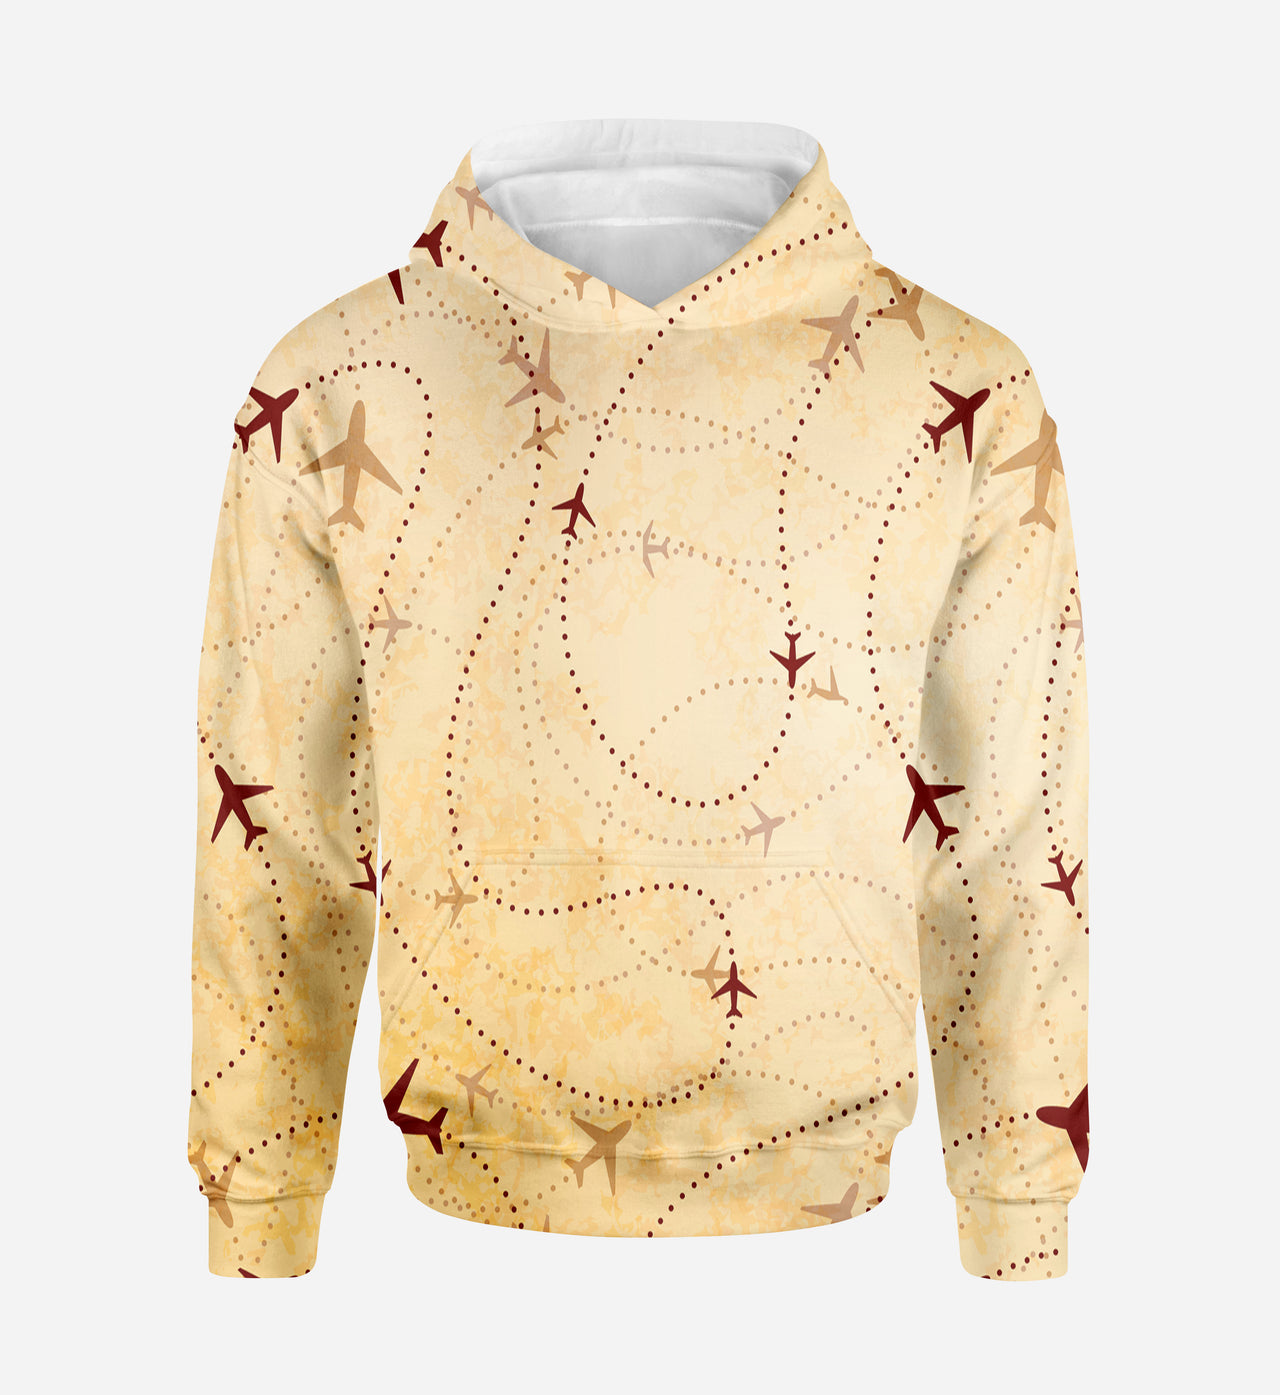 Vintage Travelling with Aircraft Designed 3D Hoodies